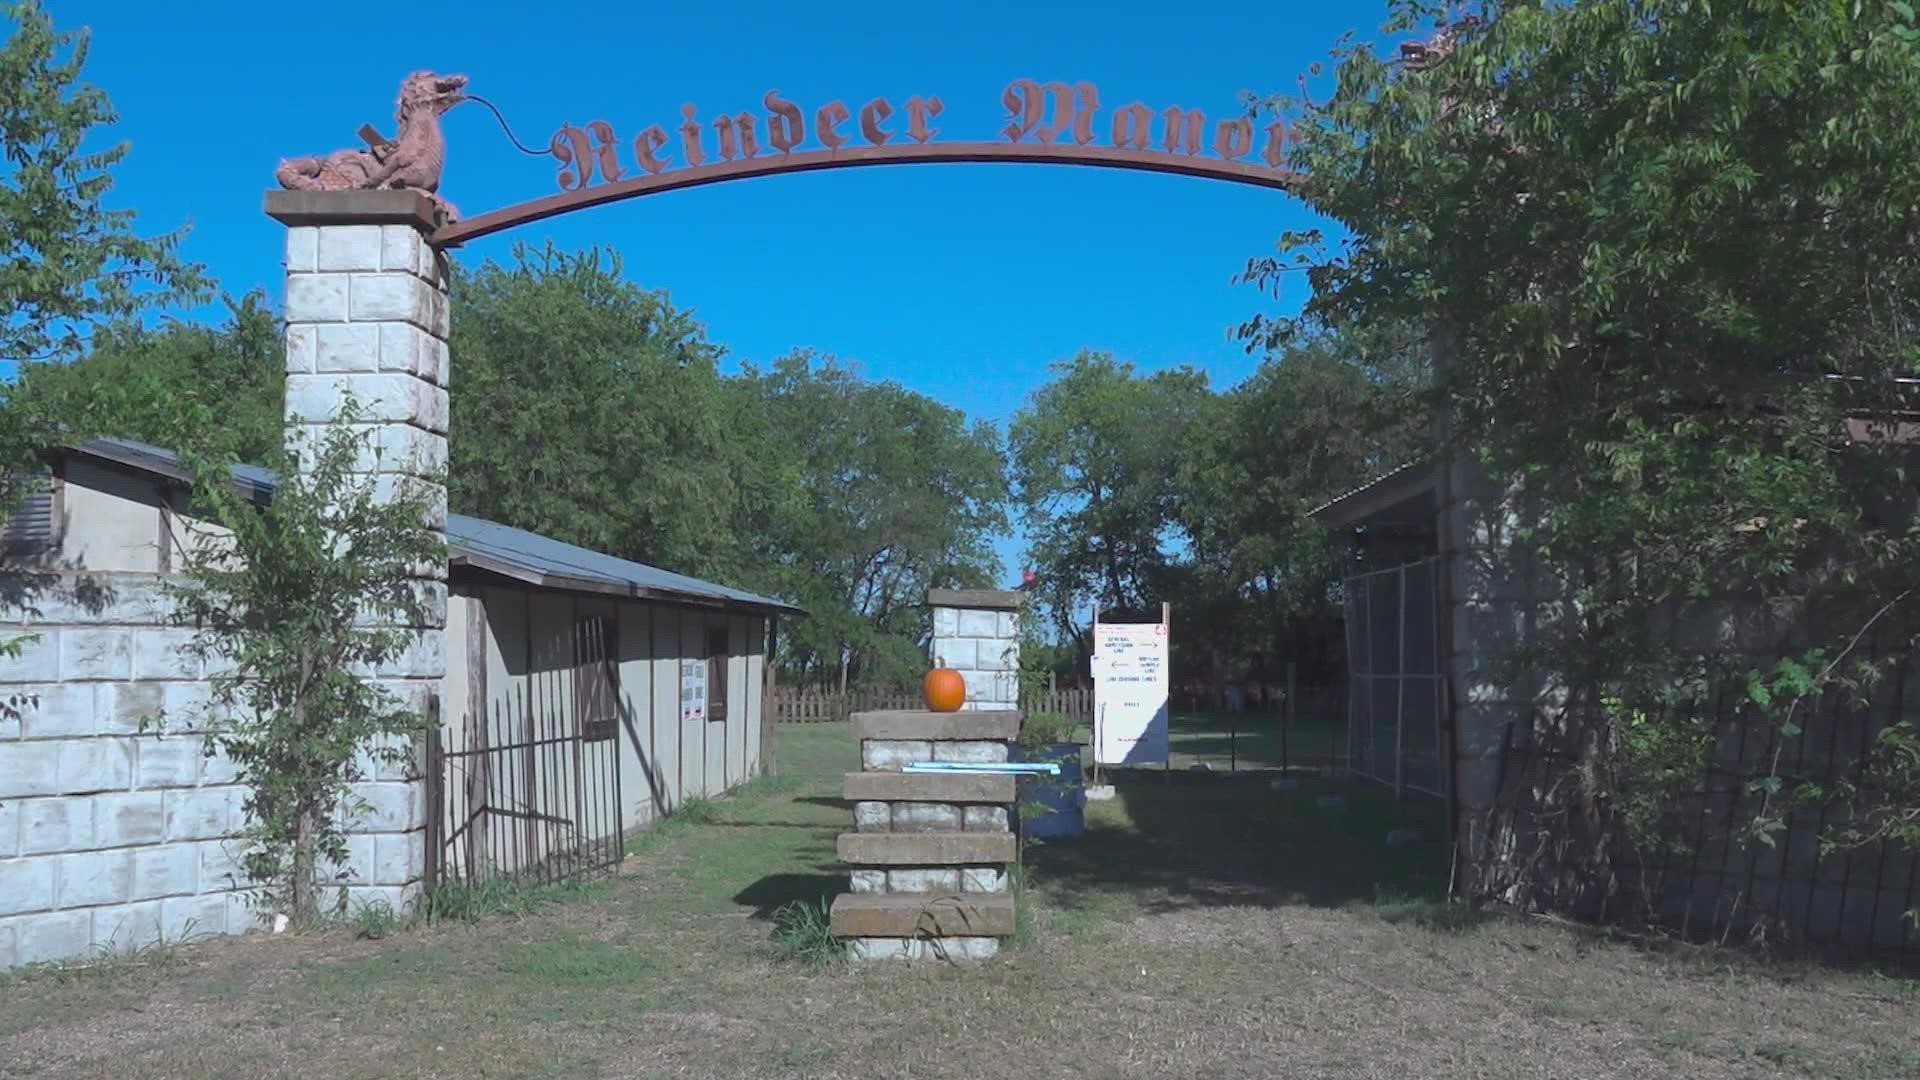 Reindeer Manor is one of the oldest haunted attractions in America, but its ghostly tales go back even further.